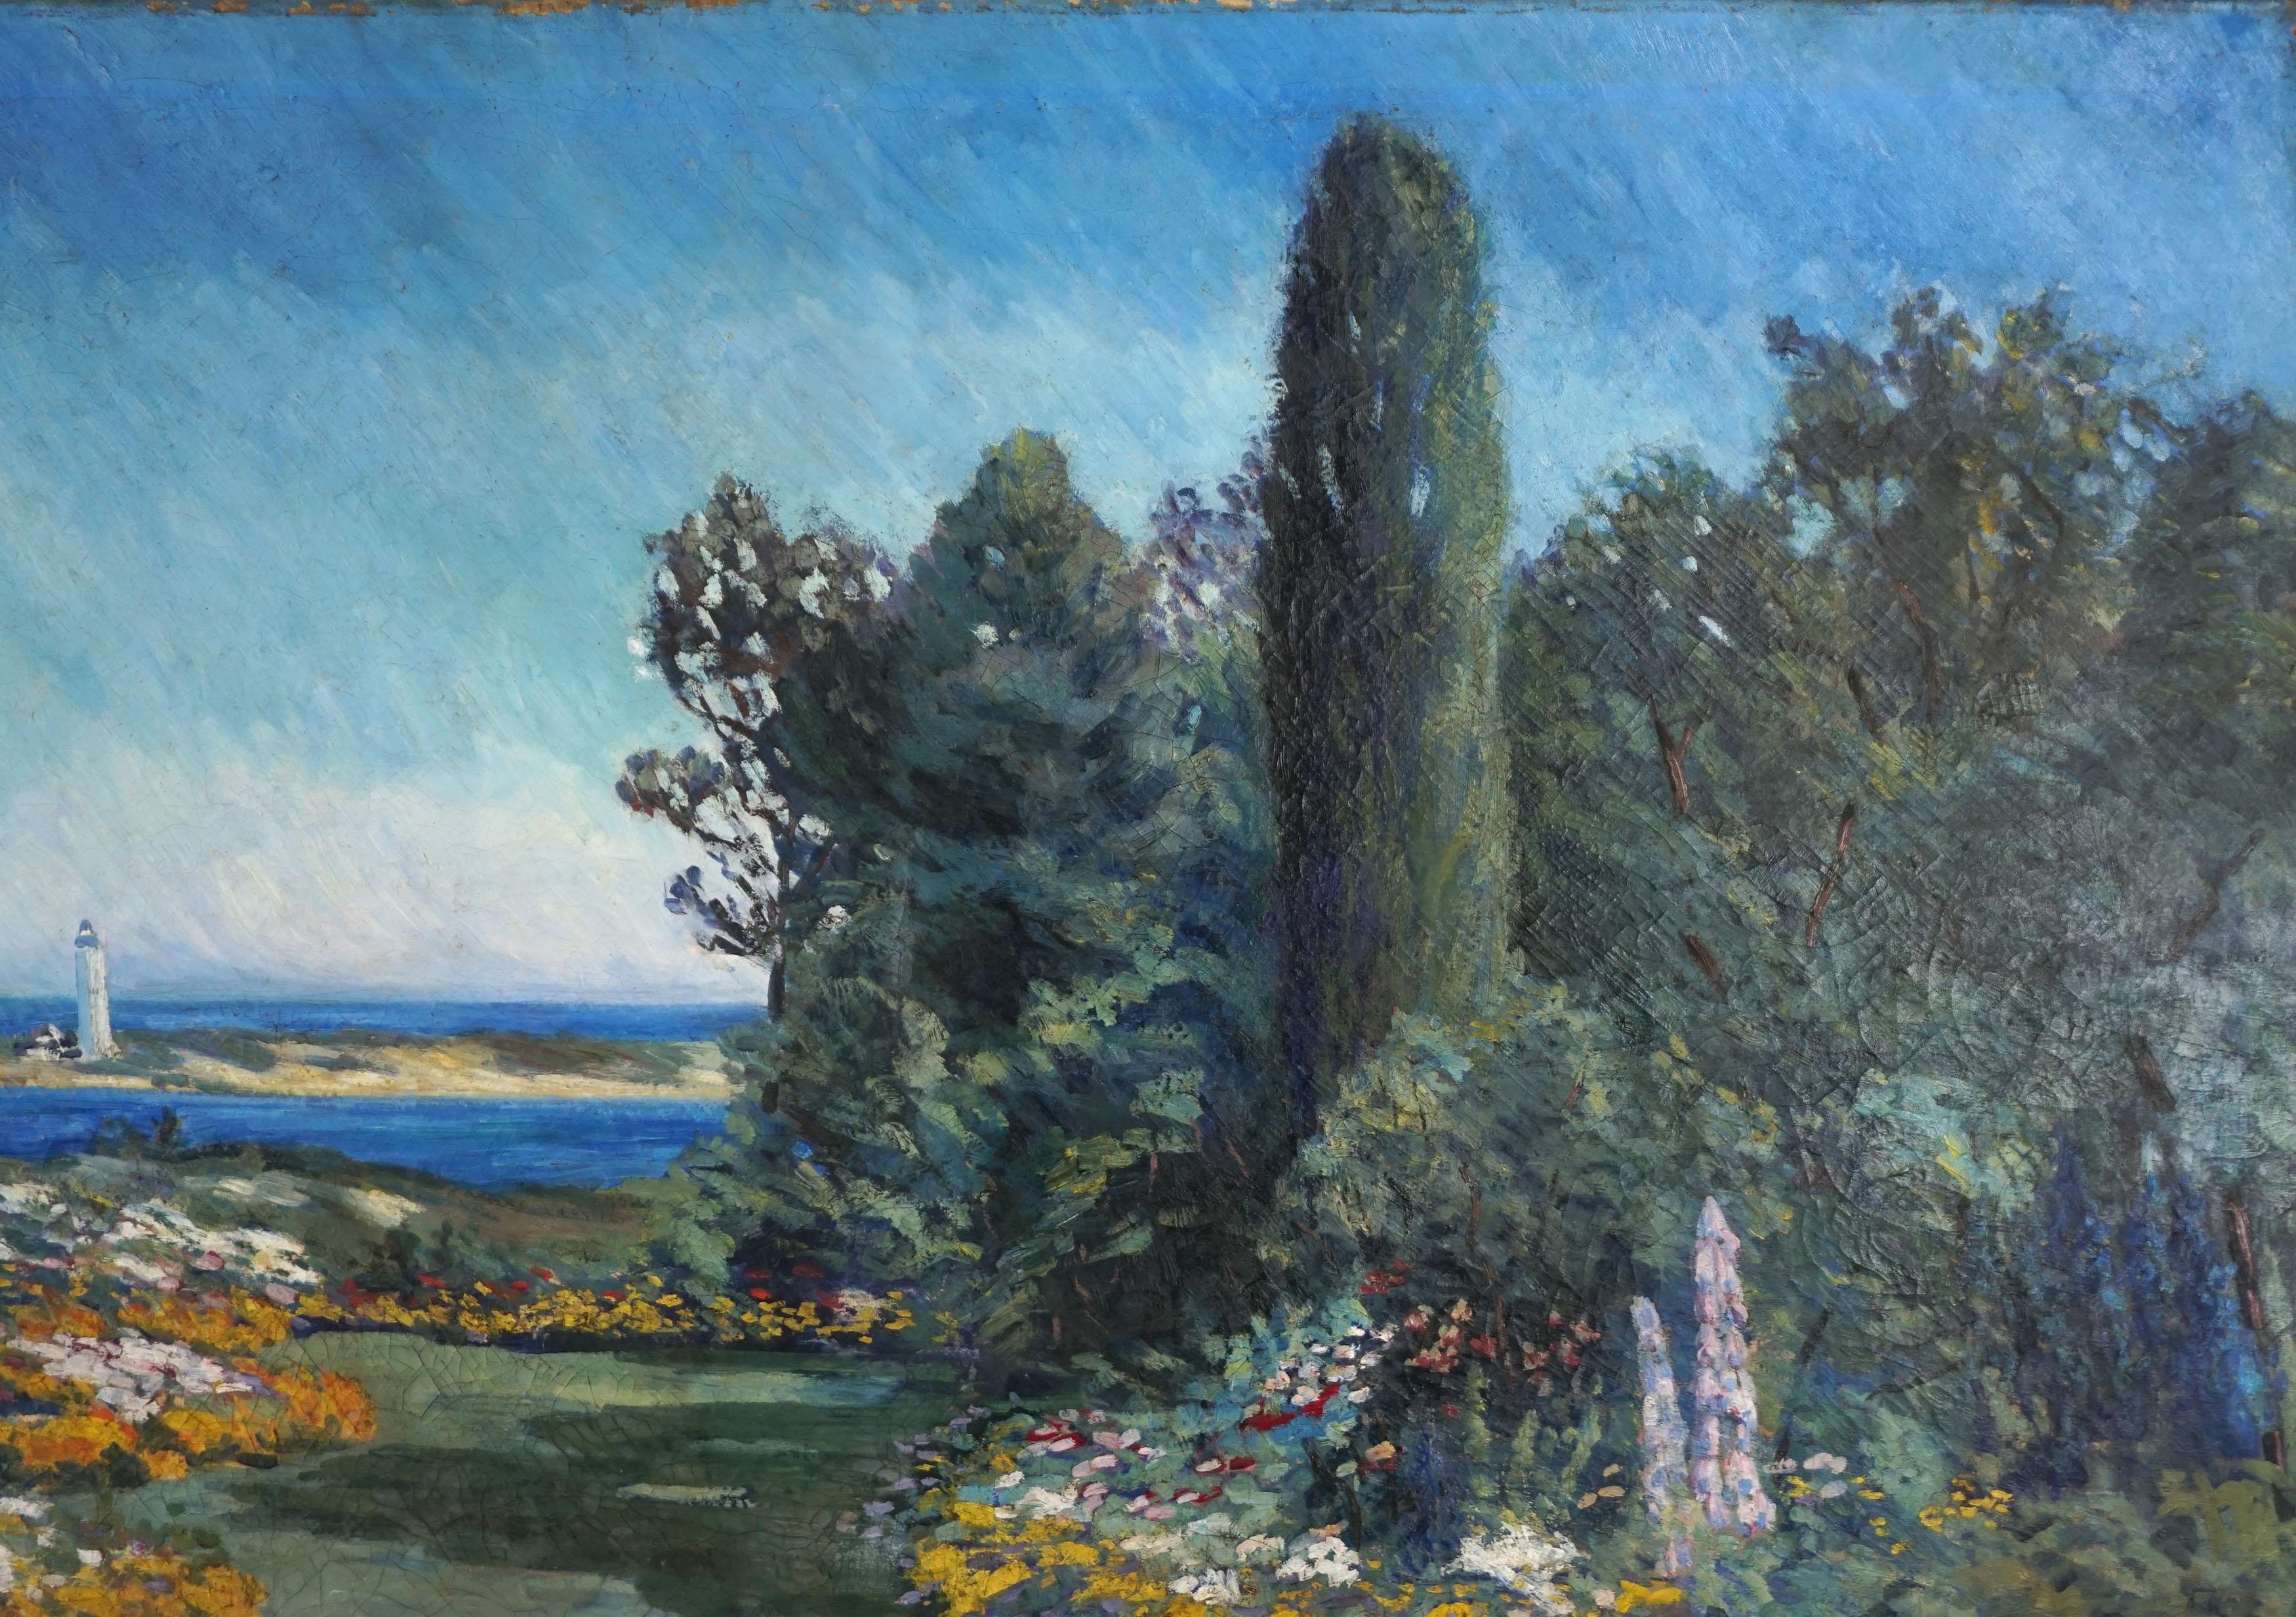 Large Scale 19th Century American Impressionism Garden and Lighthouse Landscape - American Impressionist Painting by 19th century American School